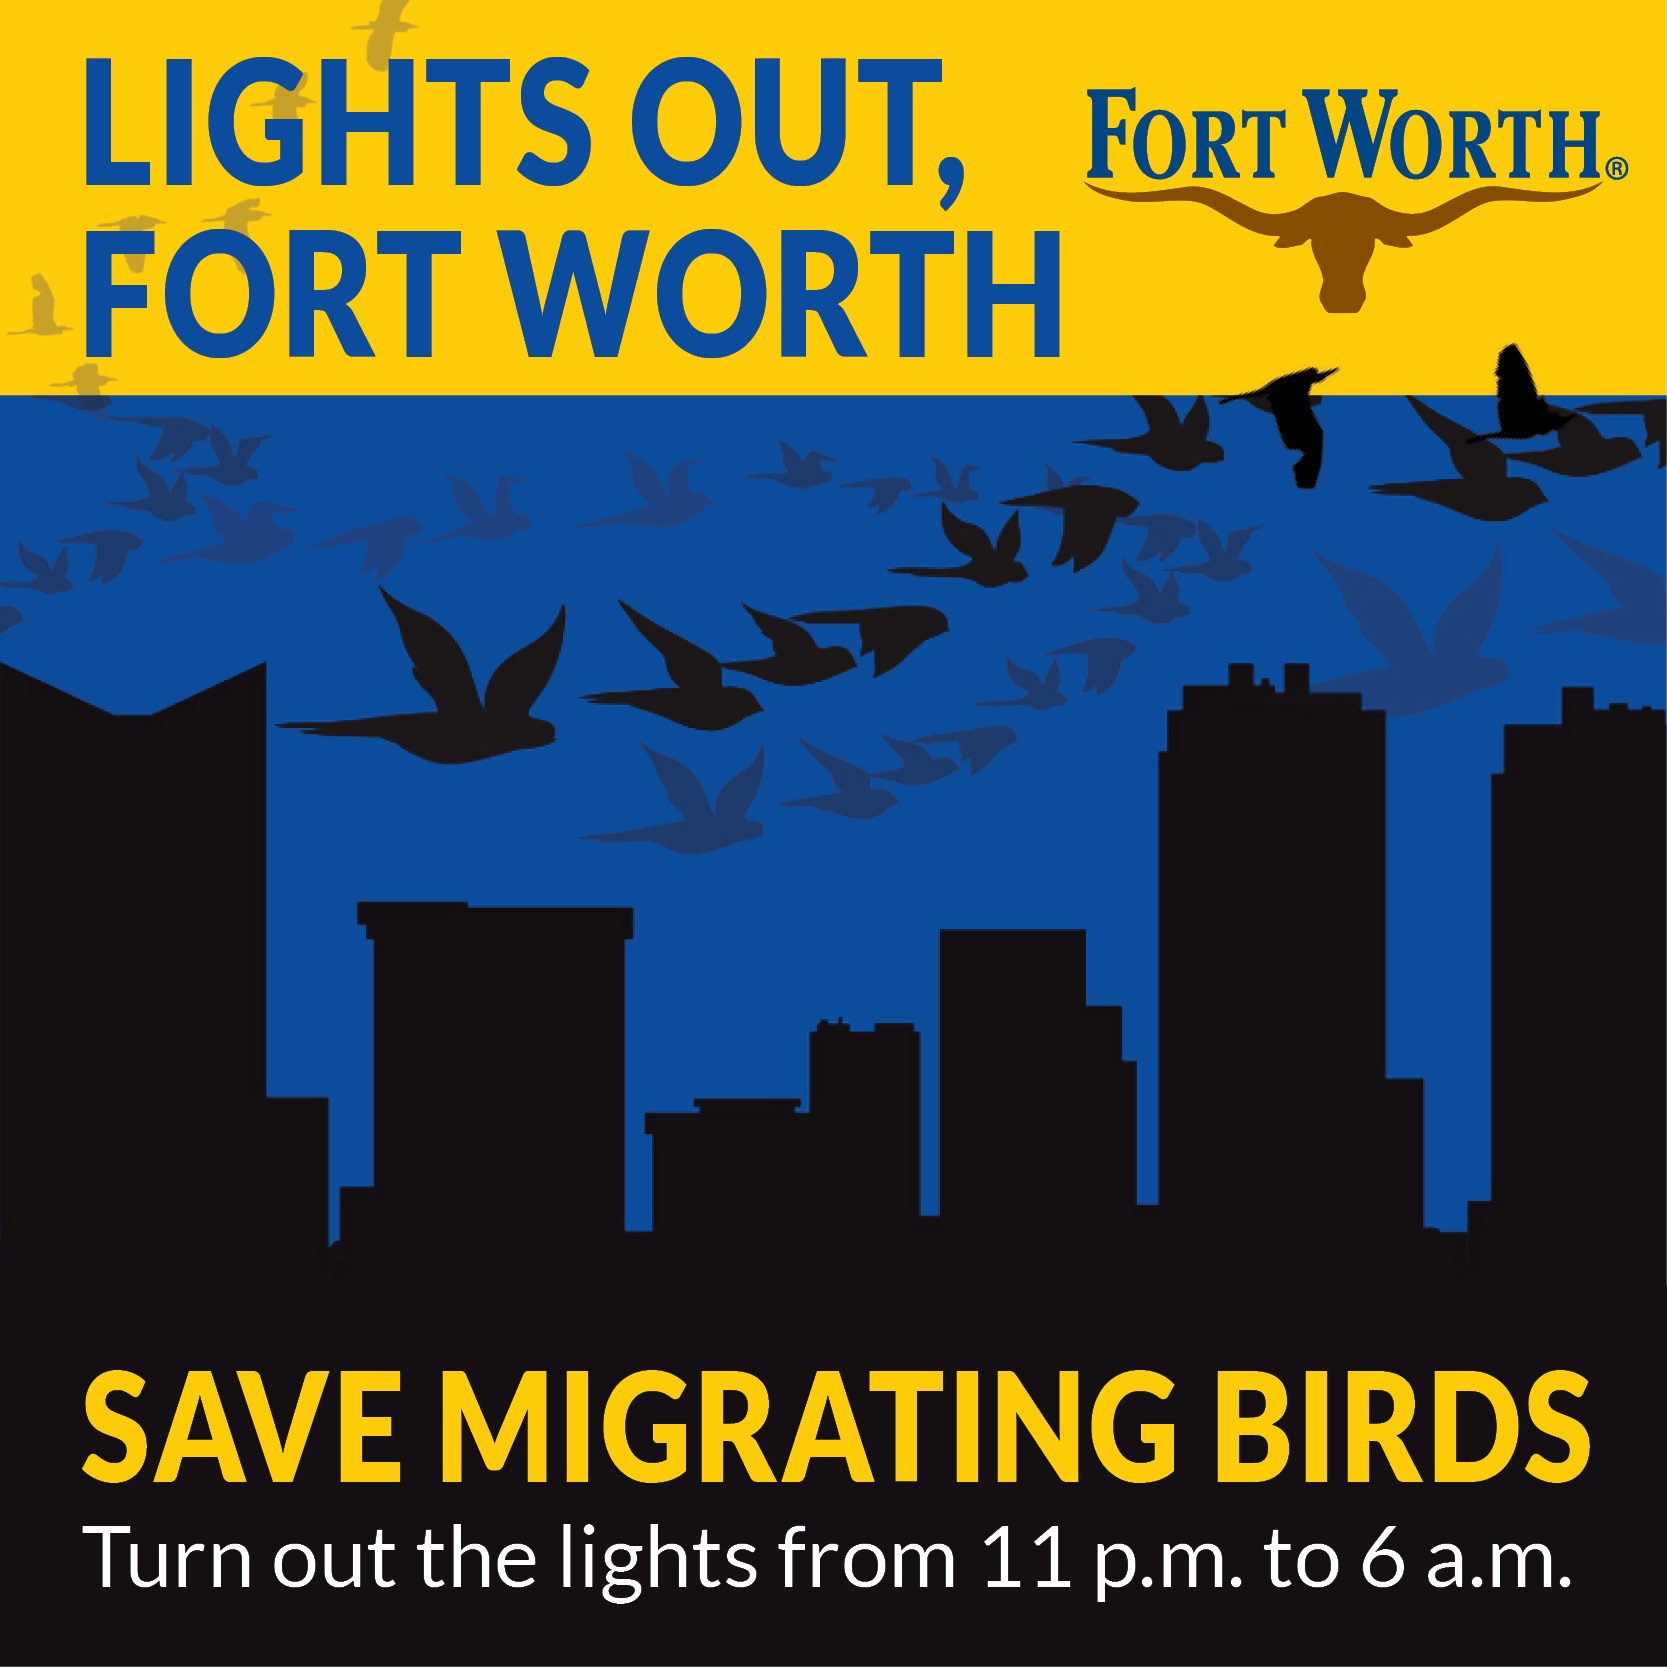 migratory-birds-lights-out-texas-small.jpg